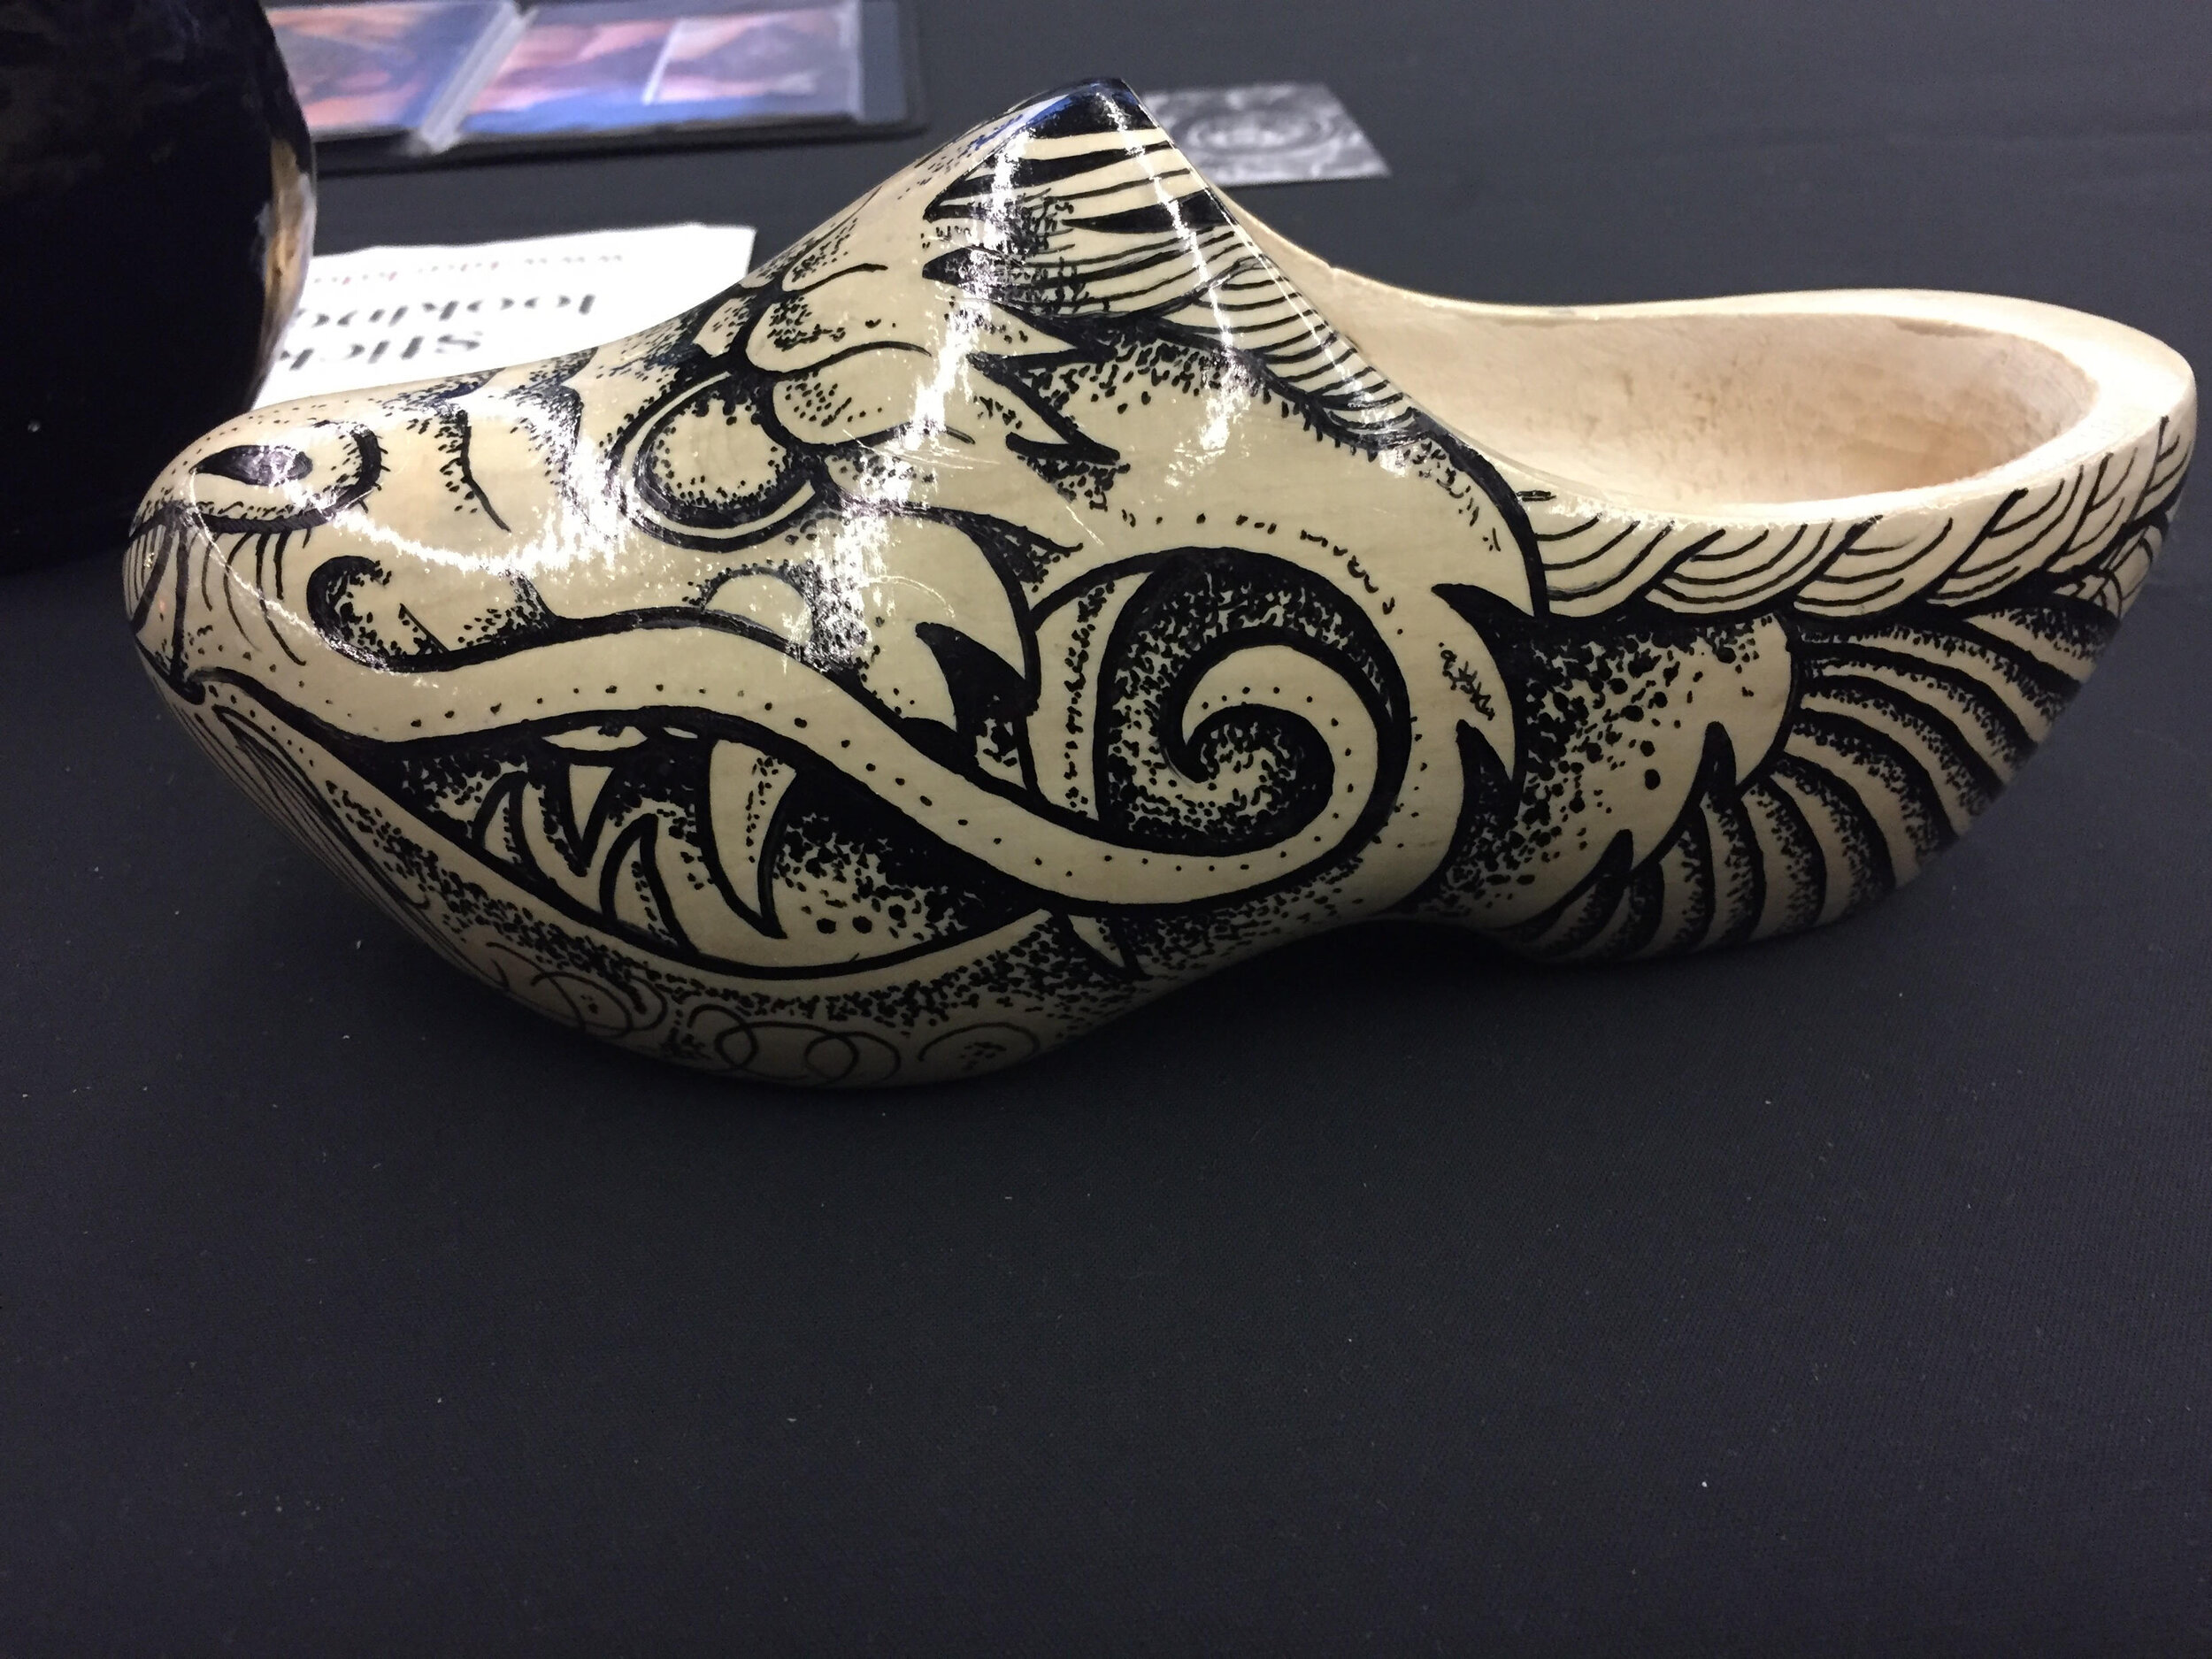 Clog Art for Charity